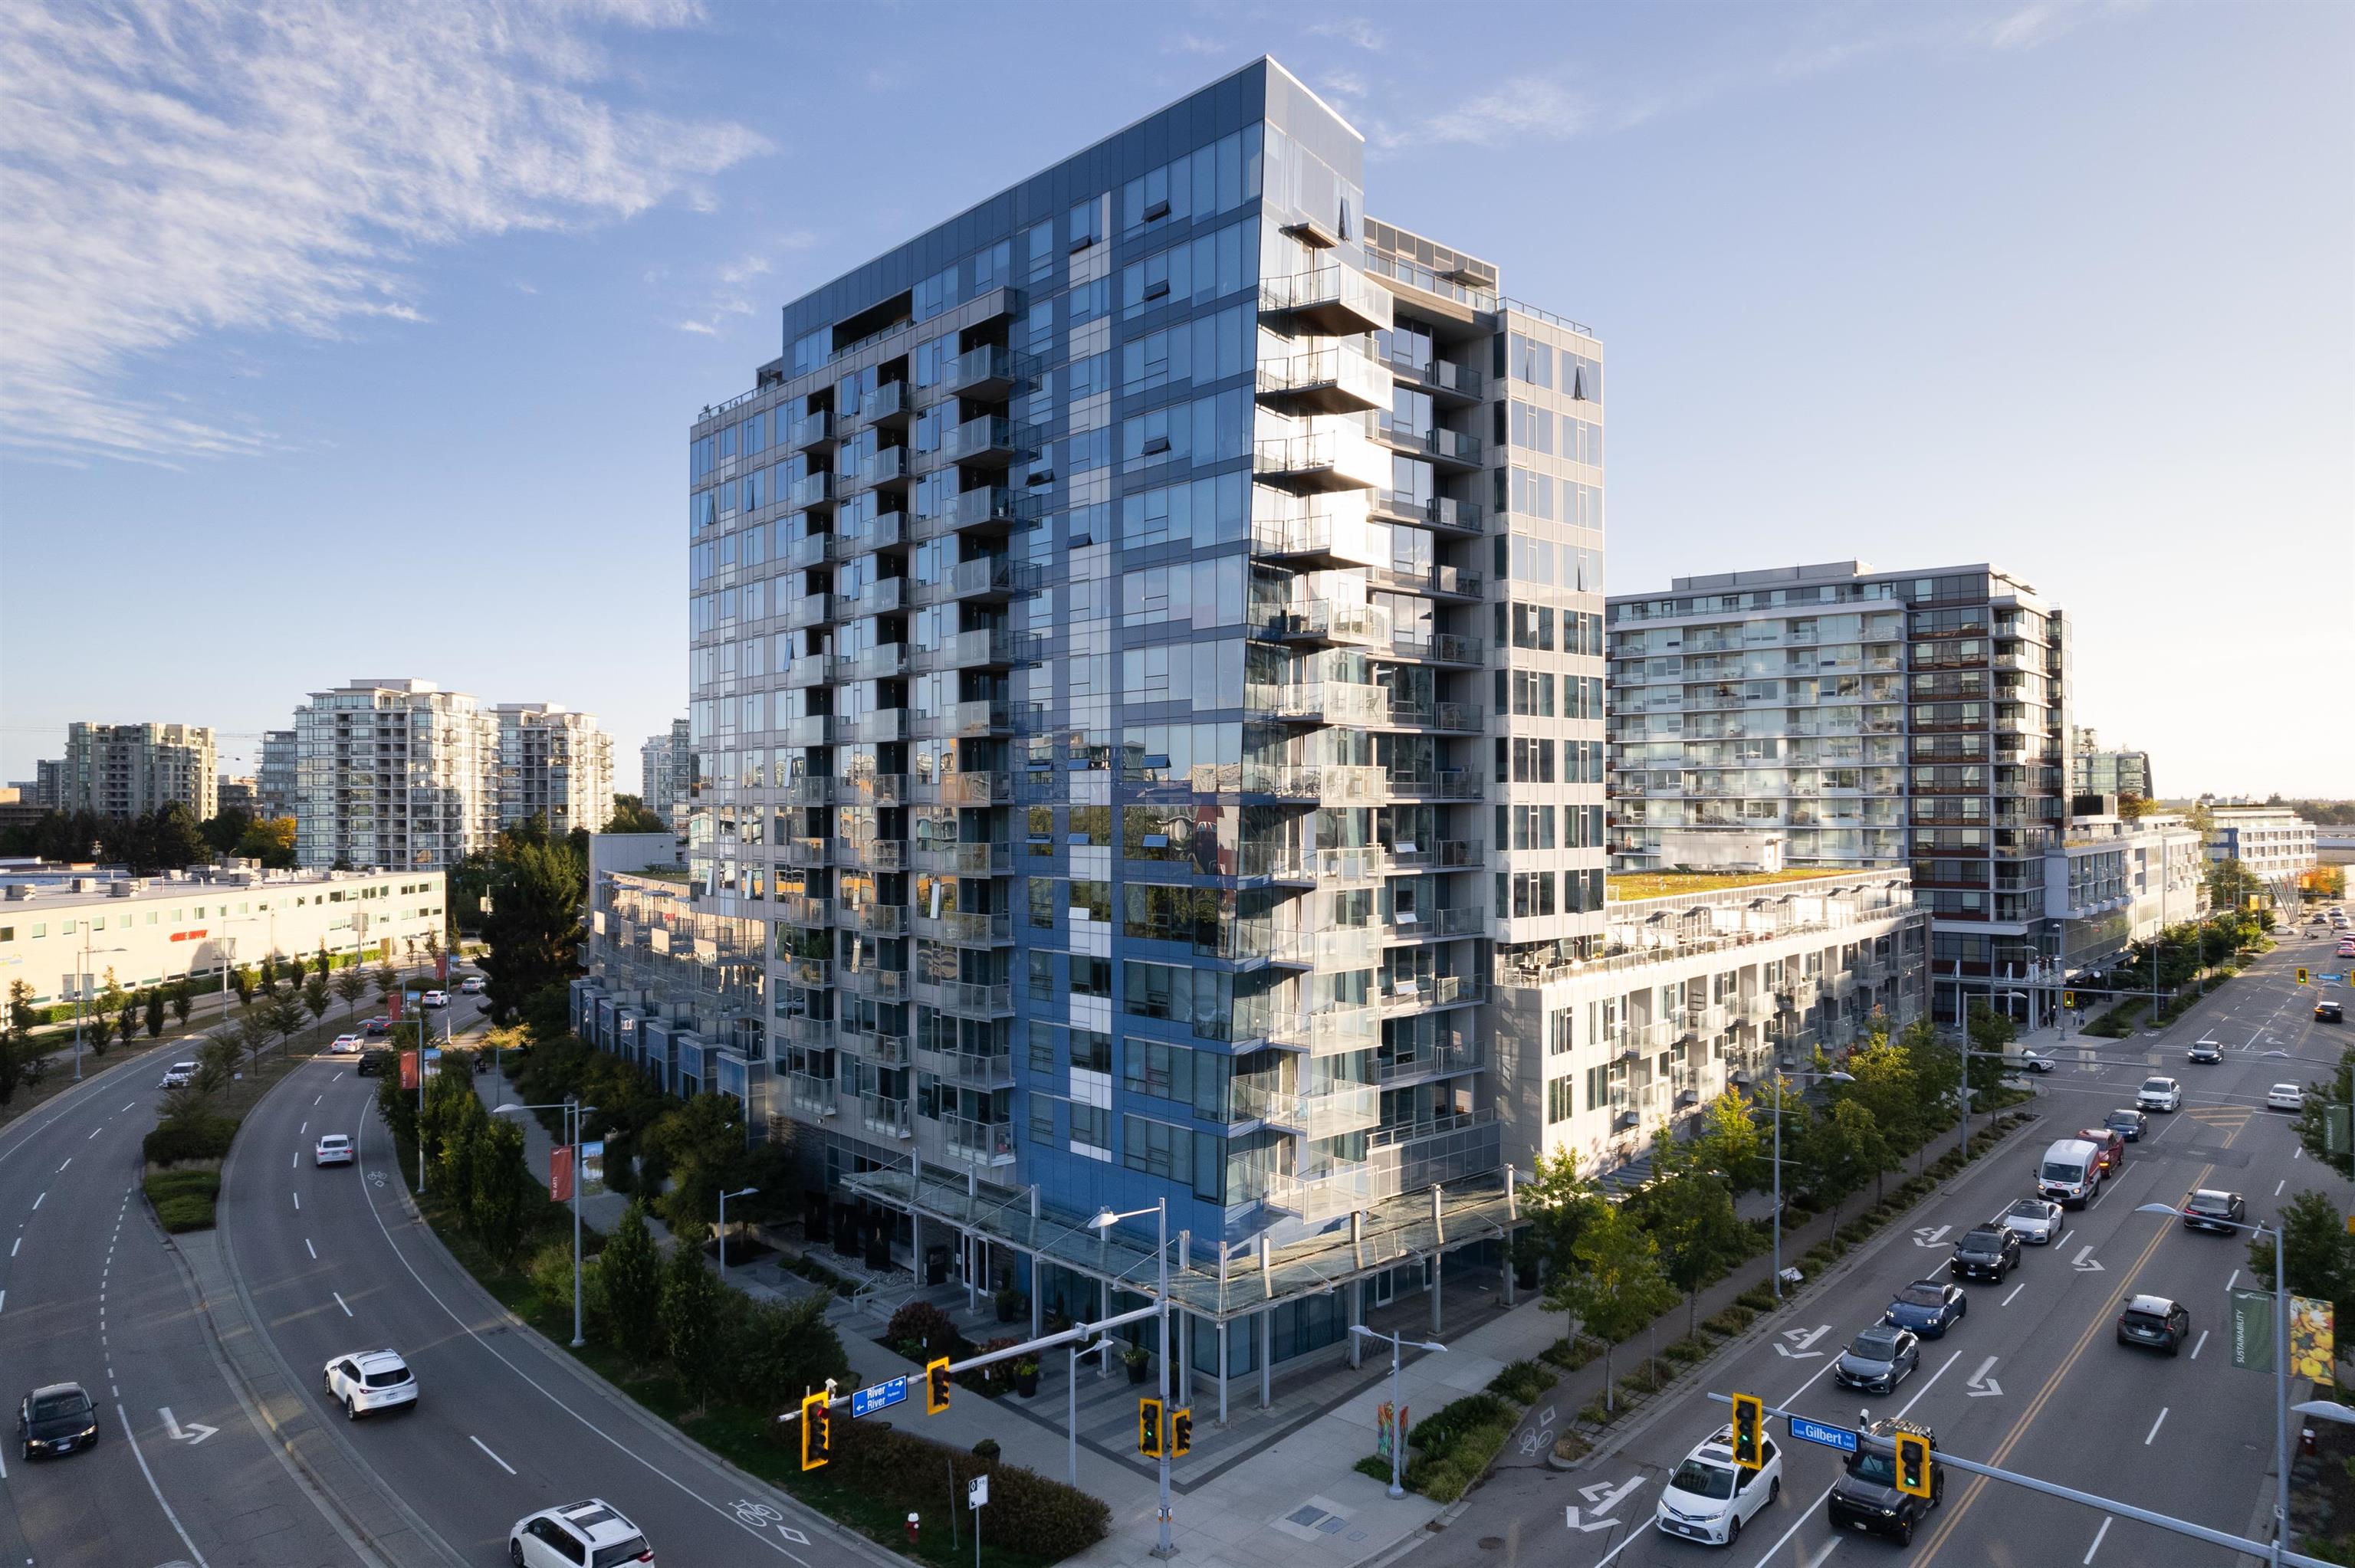 Brighouse Apartment/Condo for sale: River Park Place 1 3 bedroom 1,089 sq.ft. (Listed 2024-01-24)